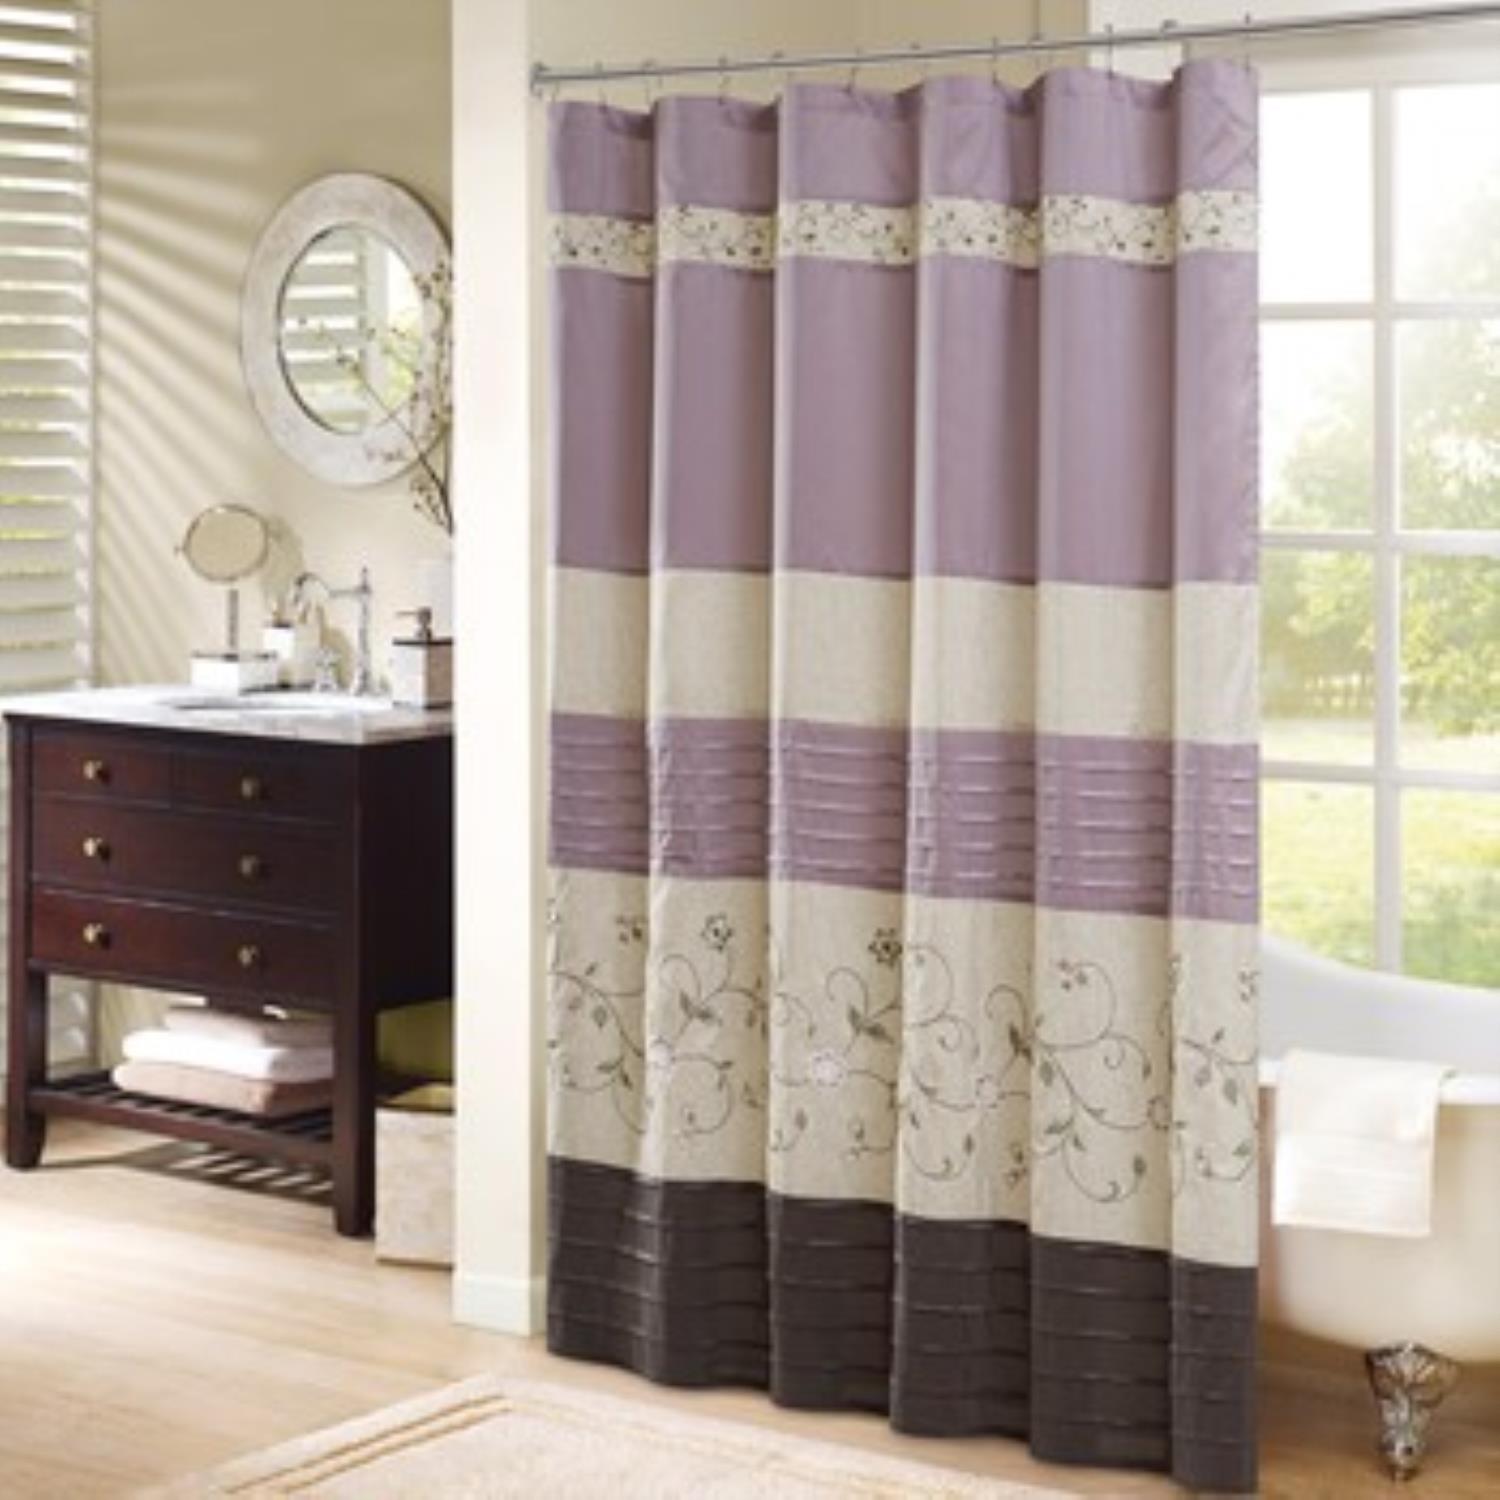 Olliix Madison Park Faux Silk Lined Shower Curtain w/Embroidery,MP70-3453